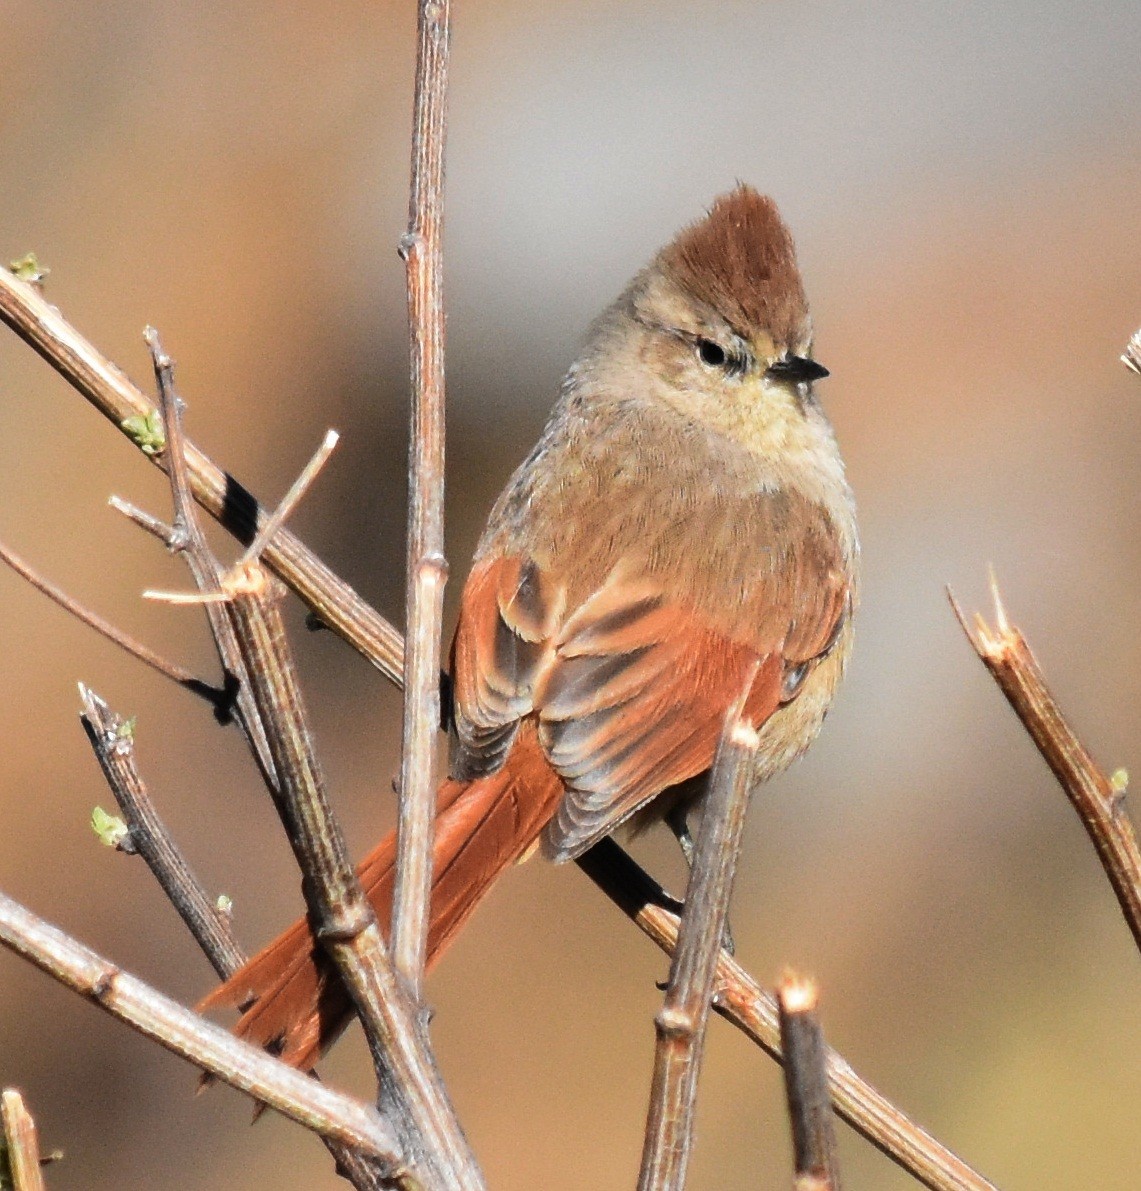 Brown-capped Tit-Spinetail - andres ebel